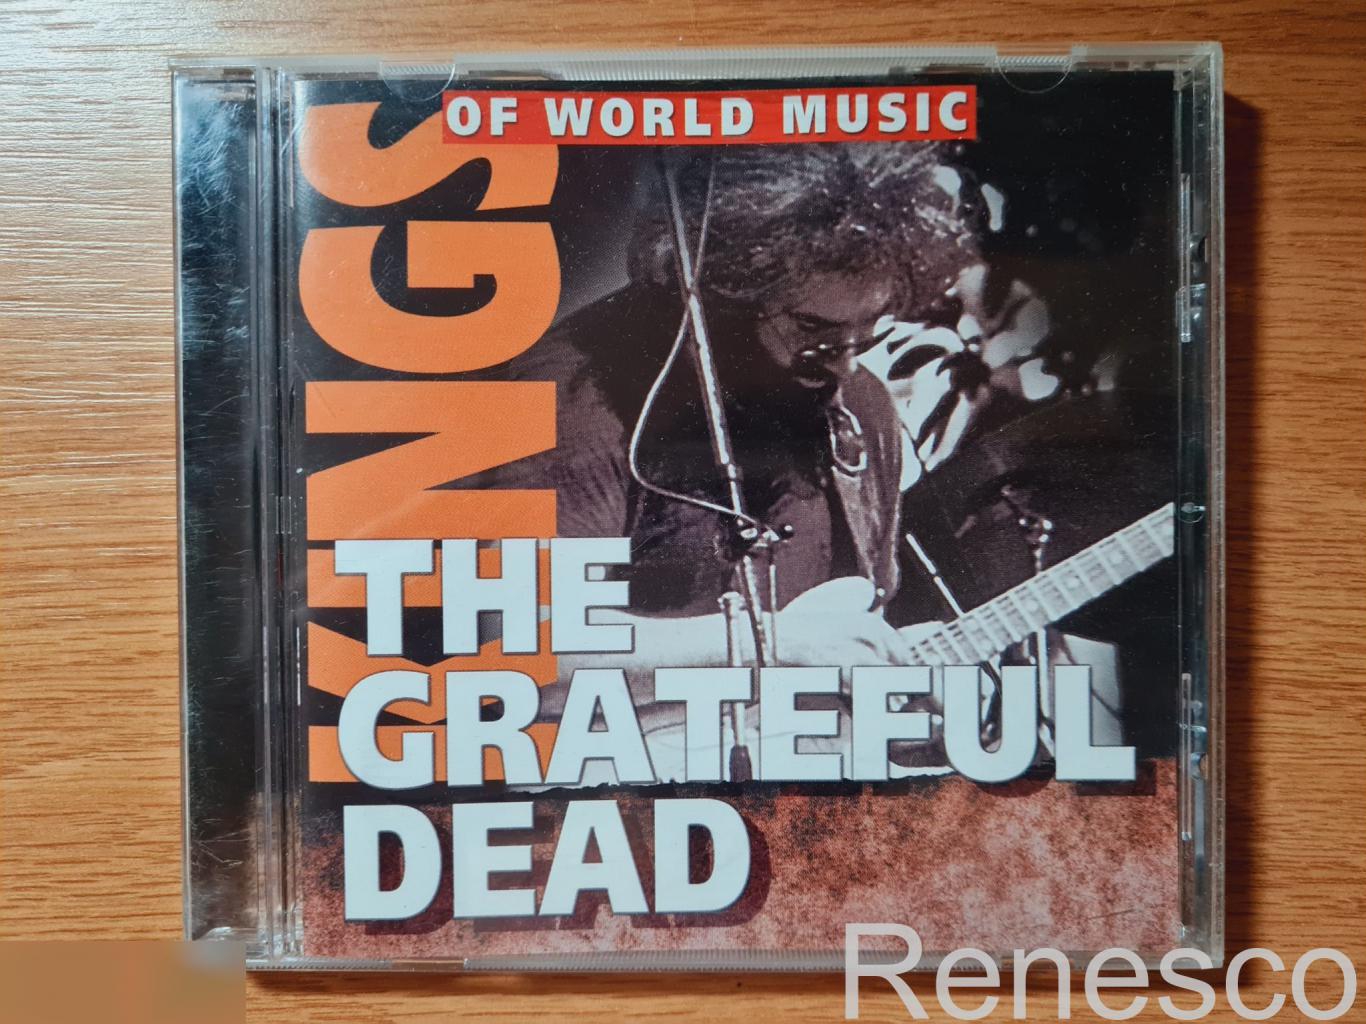 The Grateful Dead ?– Kings Of World Music (Russia) (2001) (Unofficial Release)